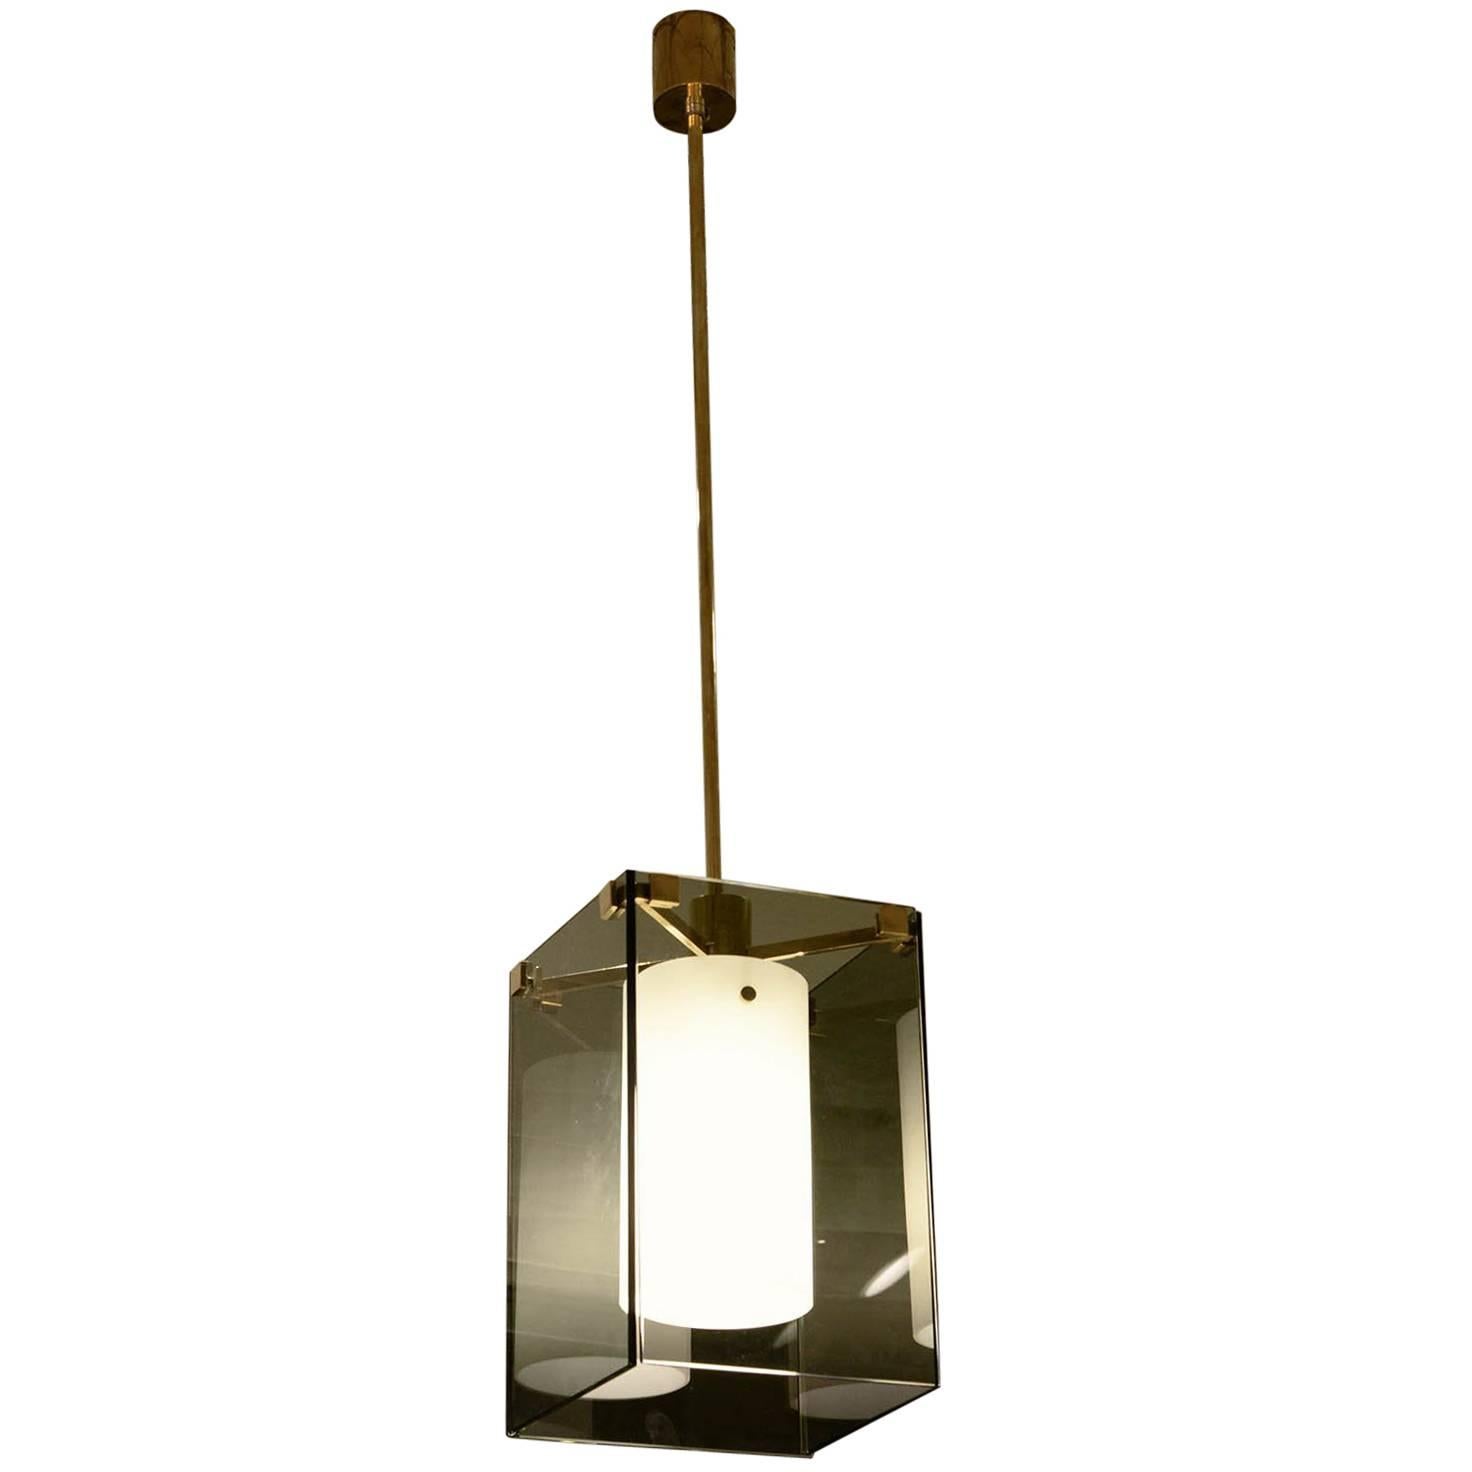 Max Ingrand for Fontana Arte, Ceiling Light in Glass and Brass, 1940s For Sale